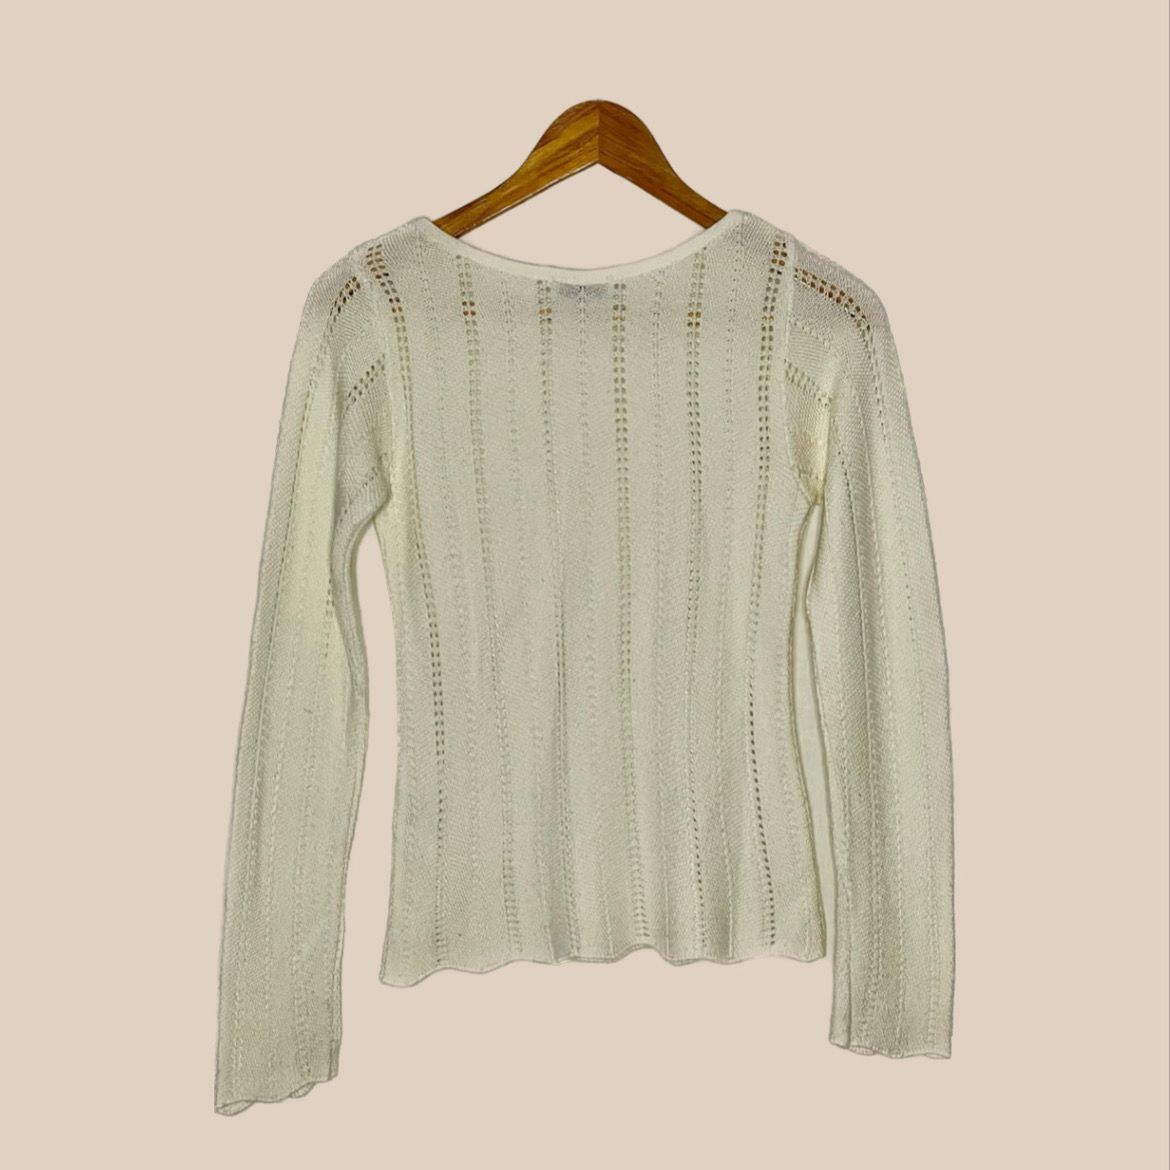 Vintage pearl white sweater